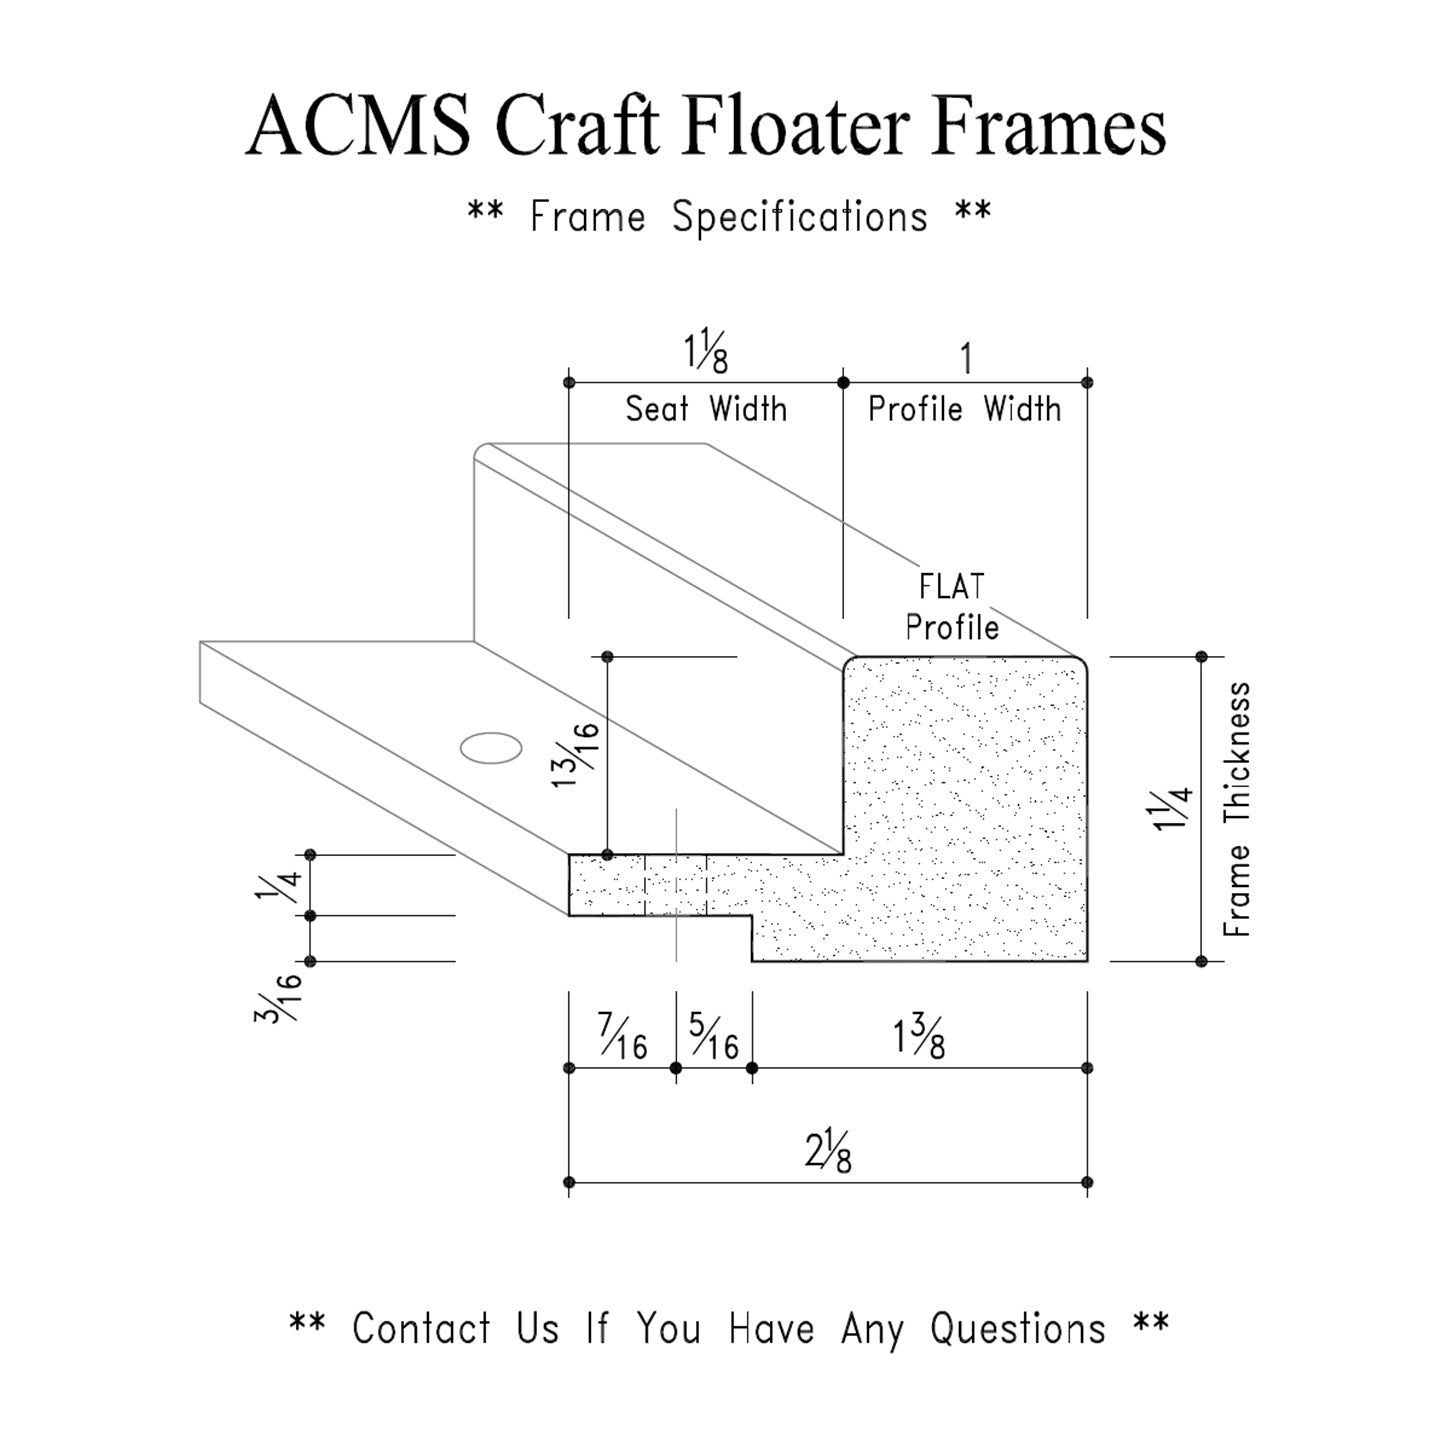 ACMS Soft Square Craft Floater Frame - For 3/4" Thick Artwork - Profile 1" FLAT - 1 1/4" Thick Frame